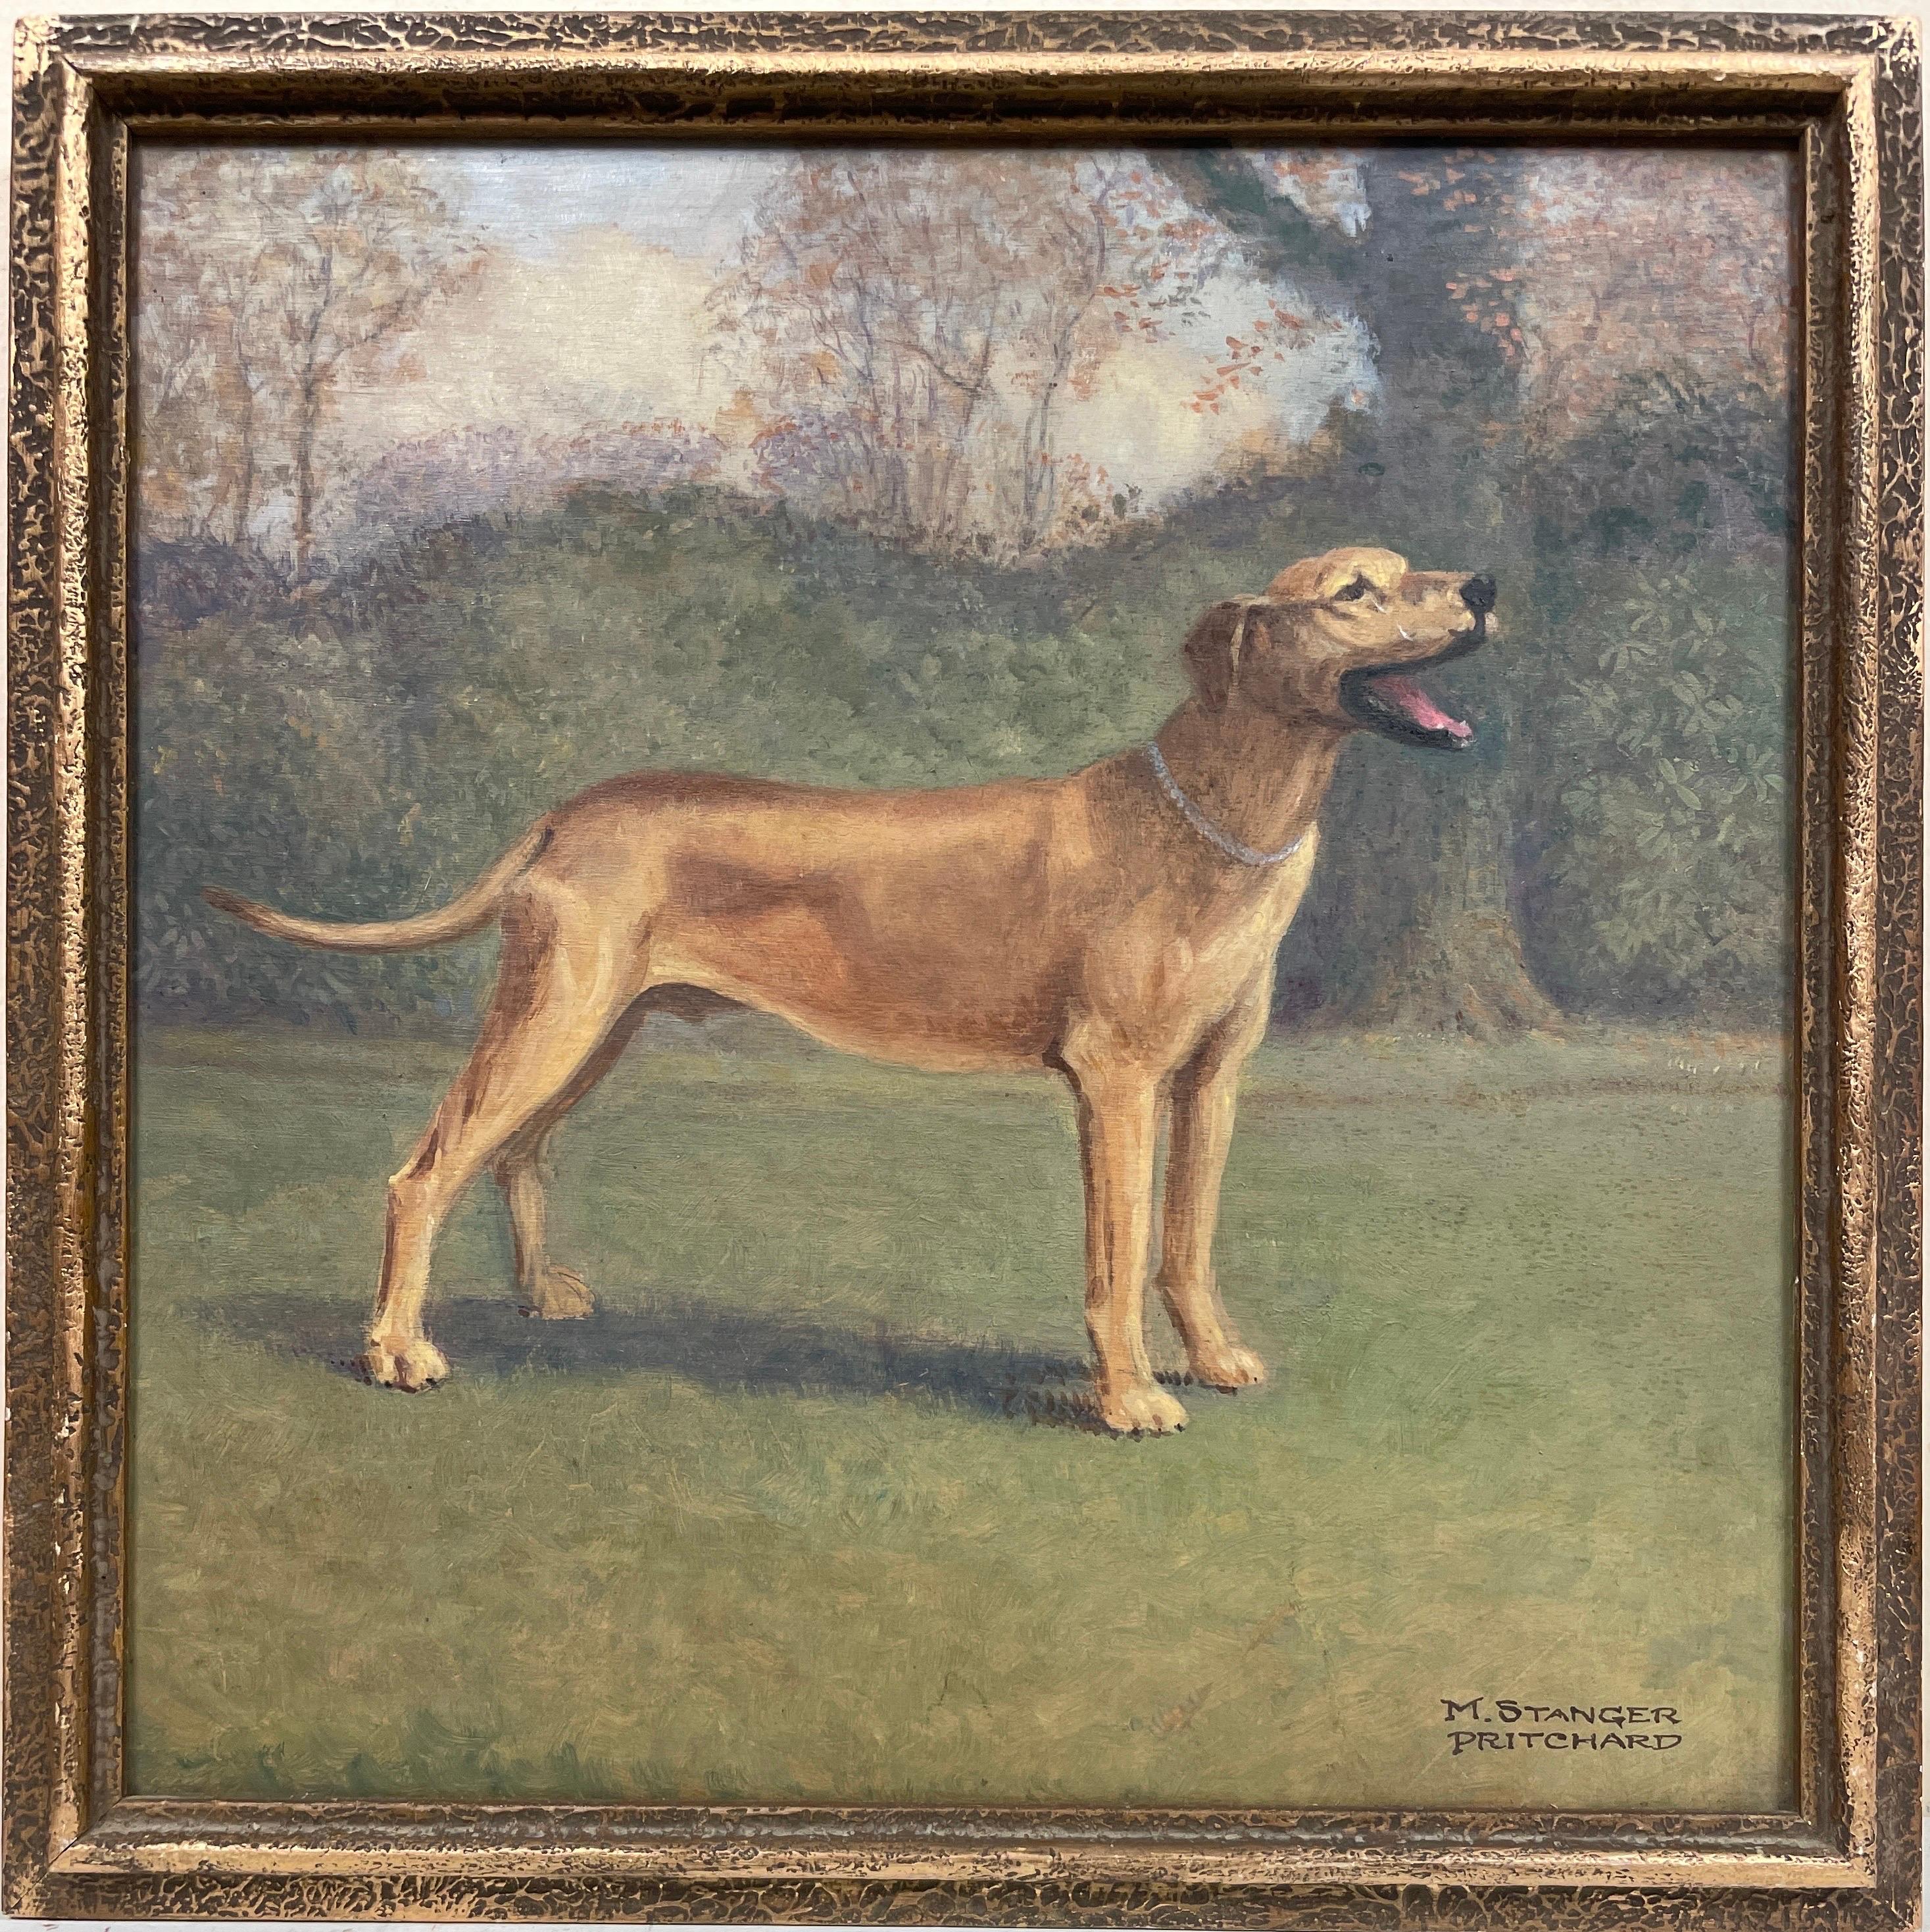 English Antique Oil Animal Painting - 1900's English Dog Painting Portrait of Great Dane standing in Garden, signed